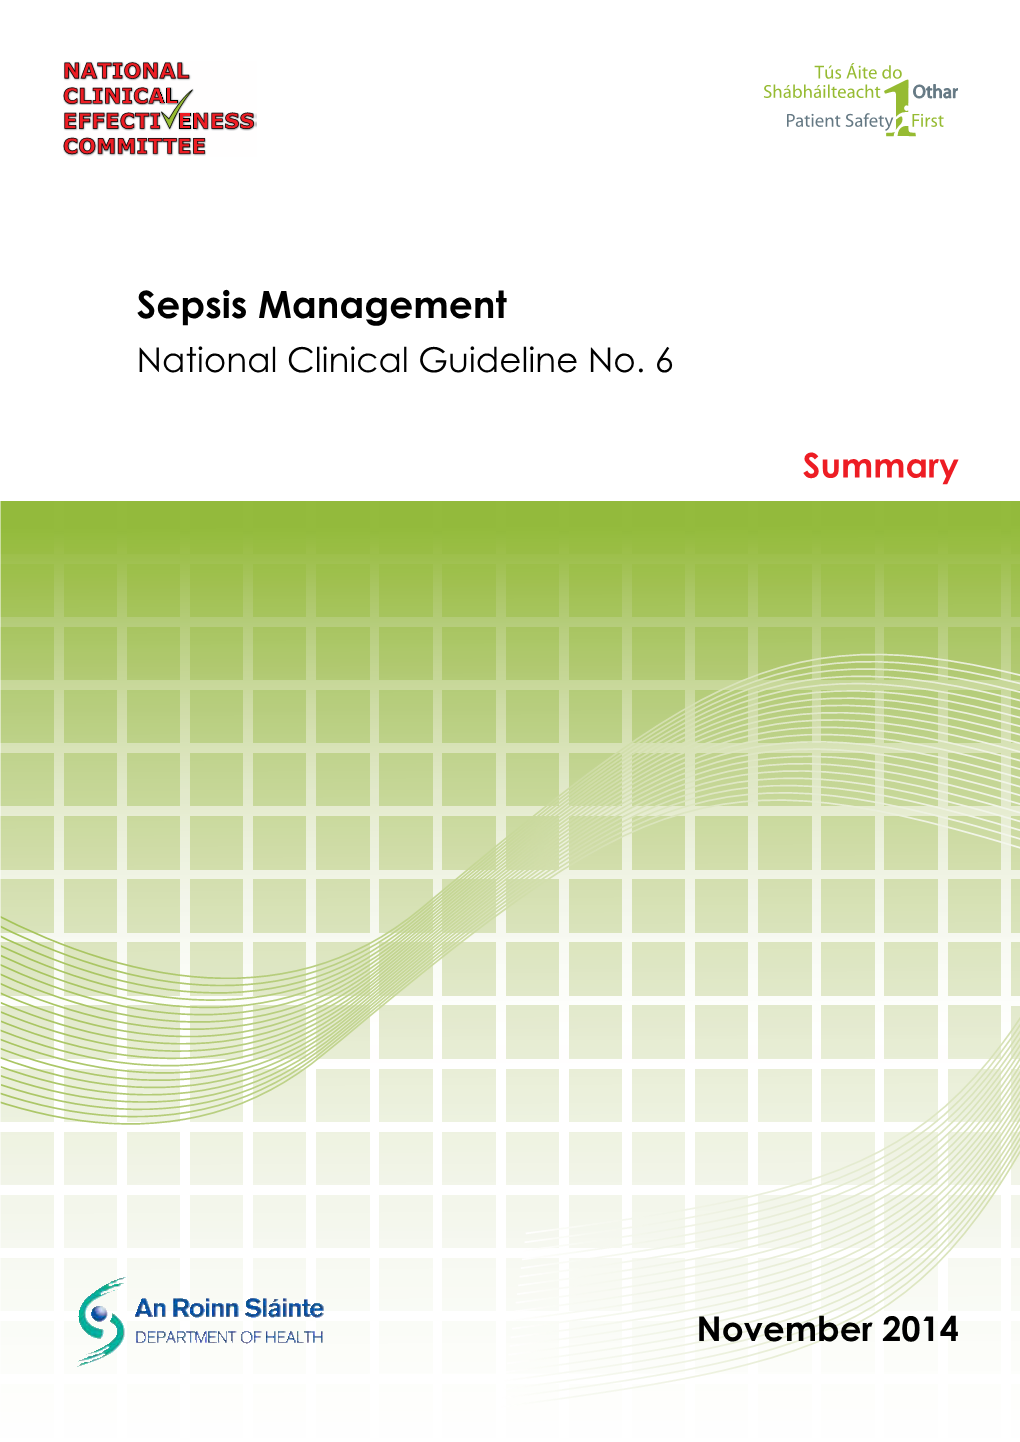 Sepsis Management National Clinical Guideline No